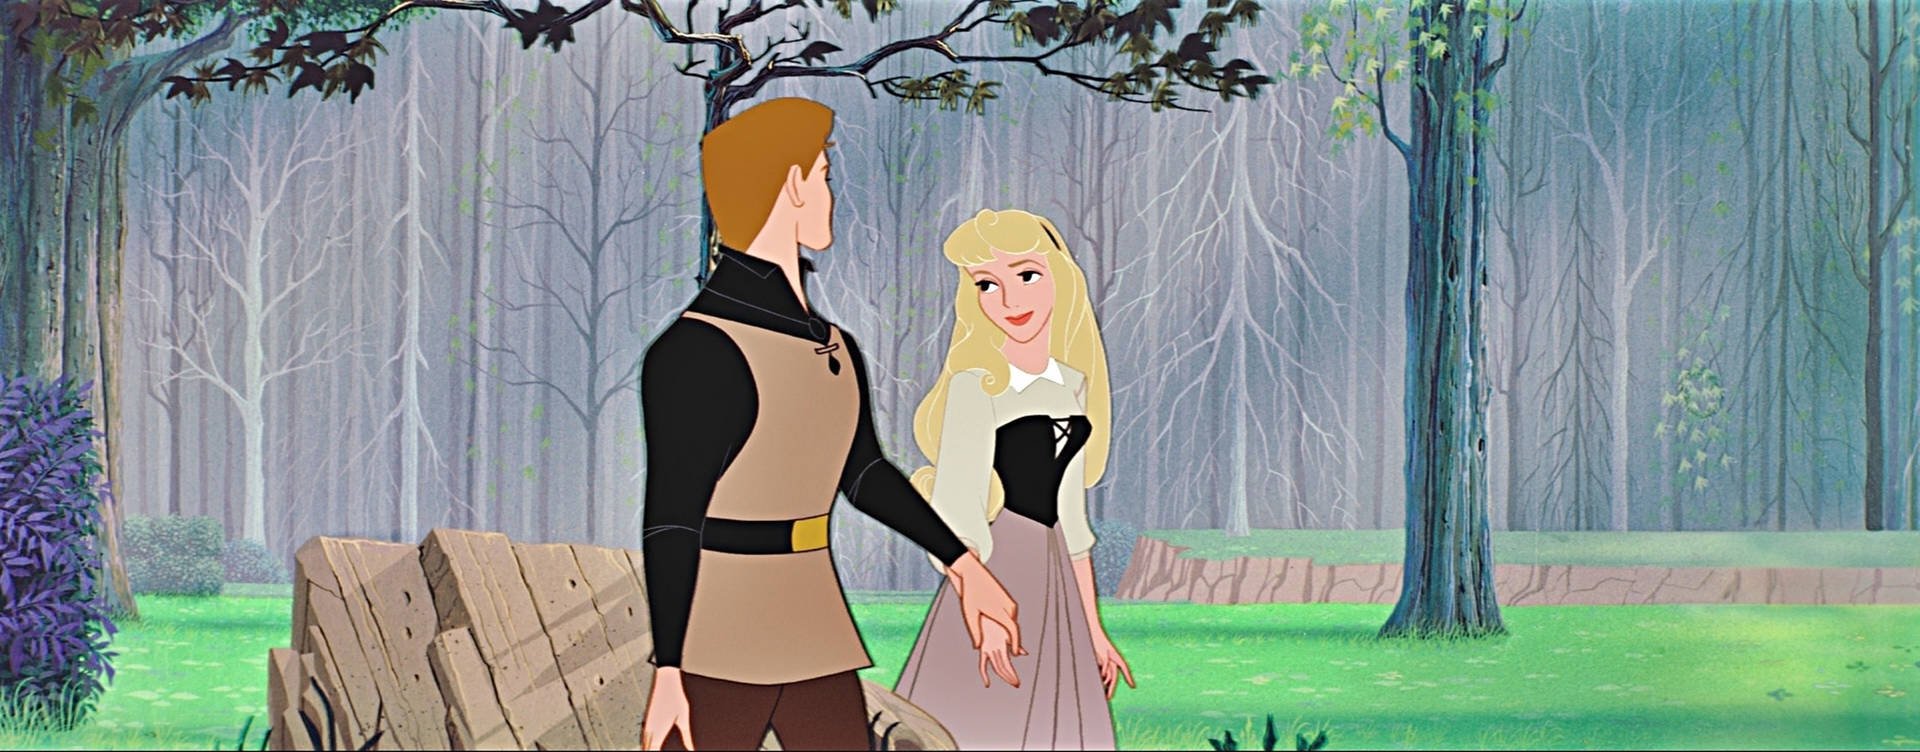 Disney Princess And Prince In Forest Wallpaper